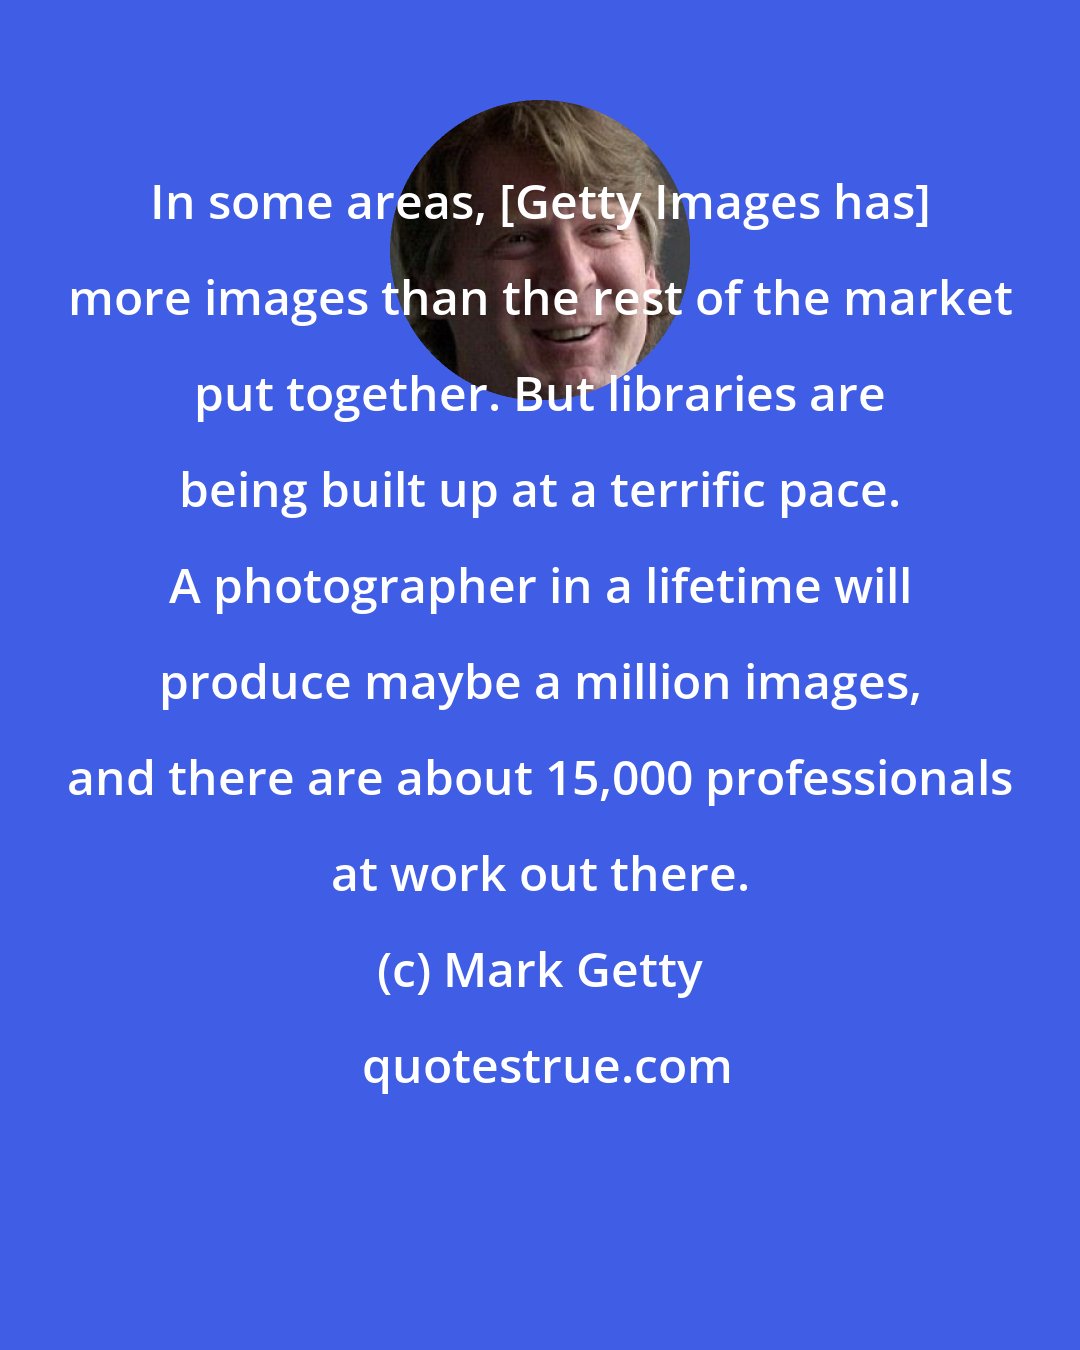 Mark Getty: In some areas, [Getty Images has] more images than the rest of the market put together. But libraries are being built up at a terrific pace. A photographer in a lifetime will produce maybe a million images, and there are about 15,000 professionals at work out there.